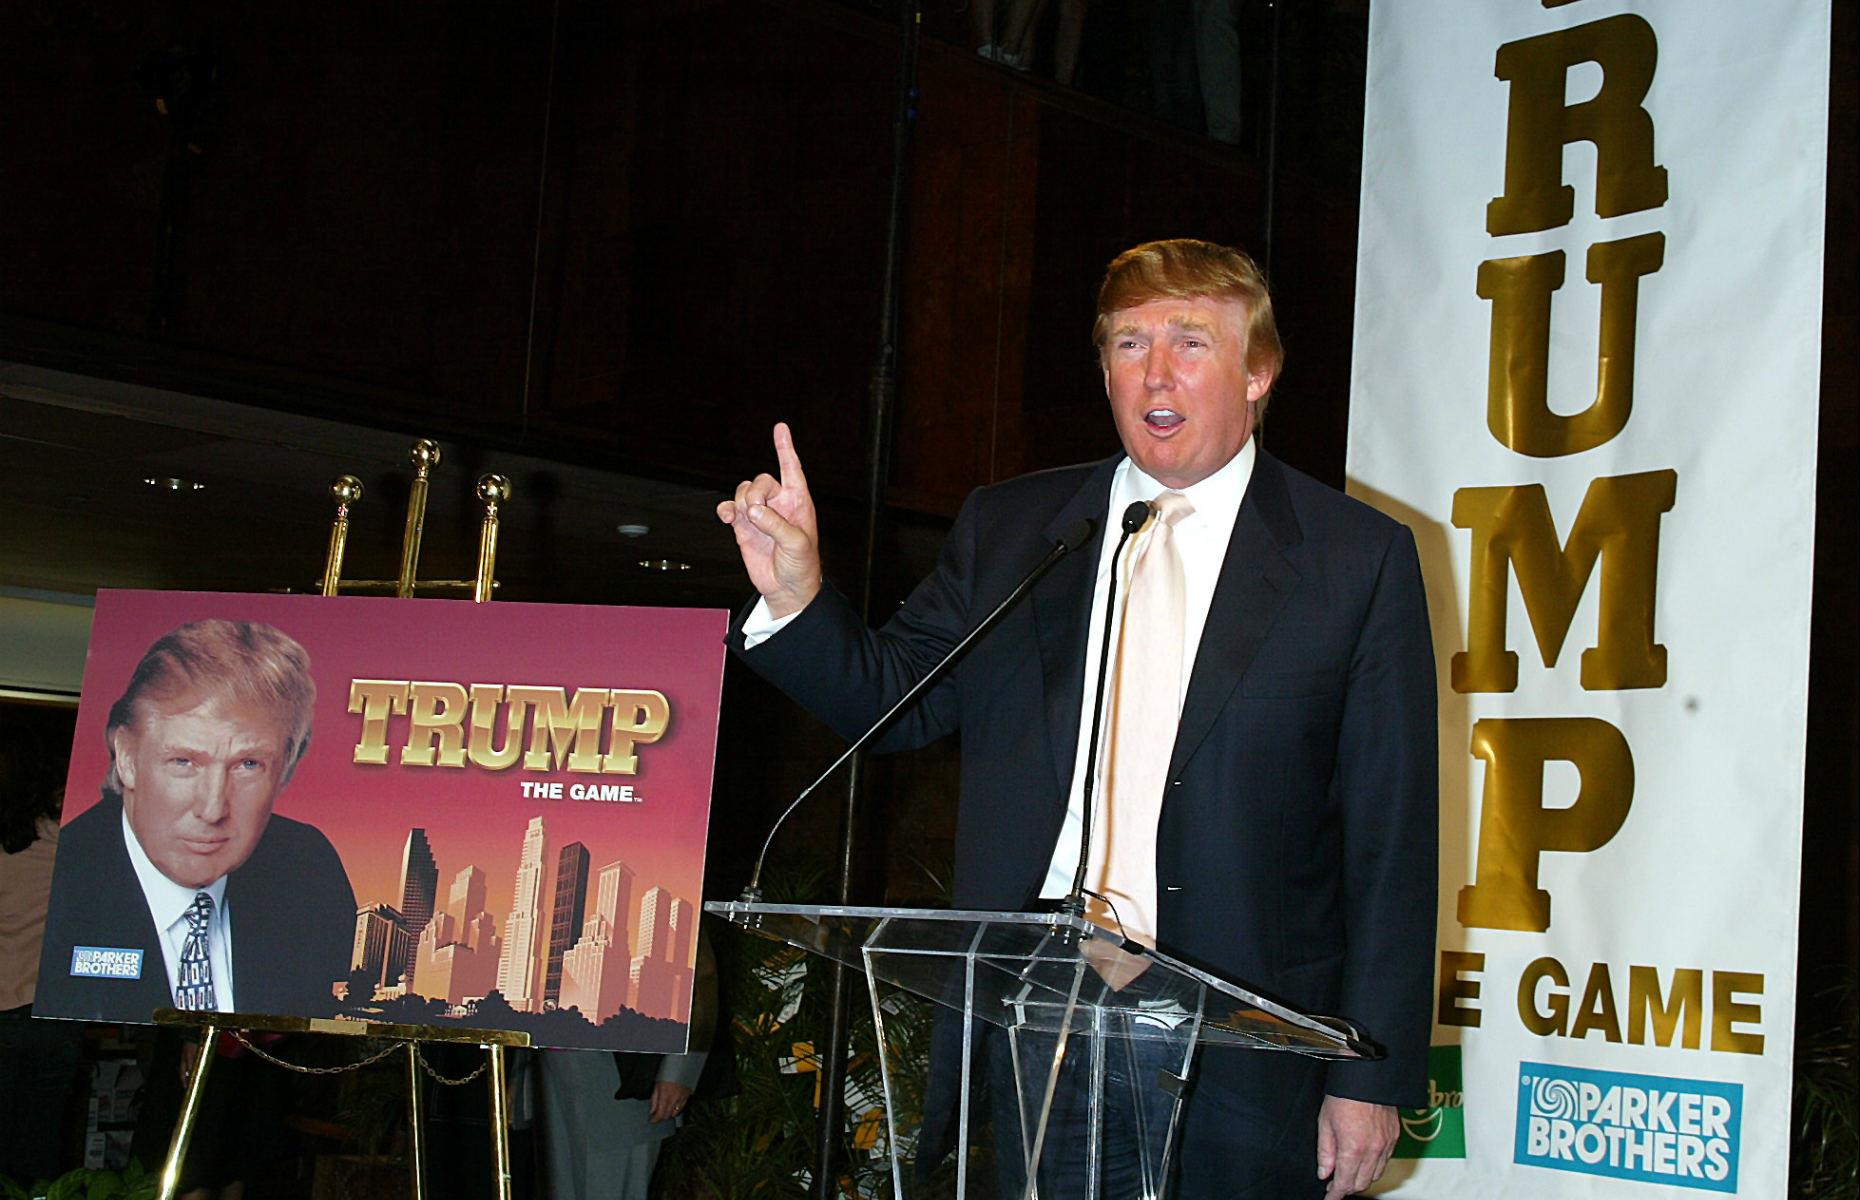 Trump The Game, 1989